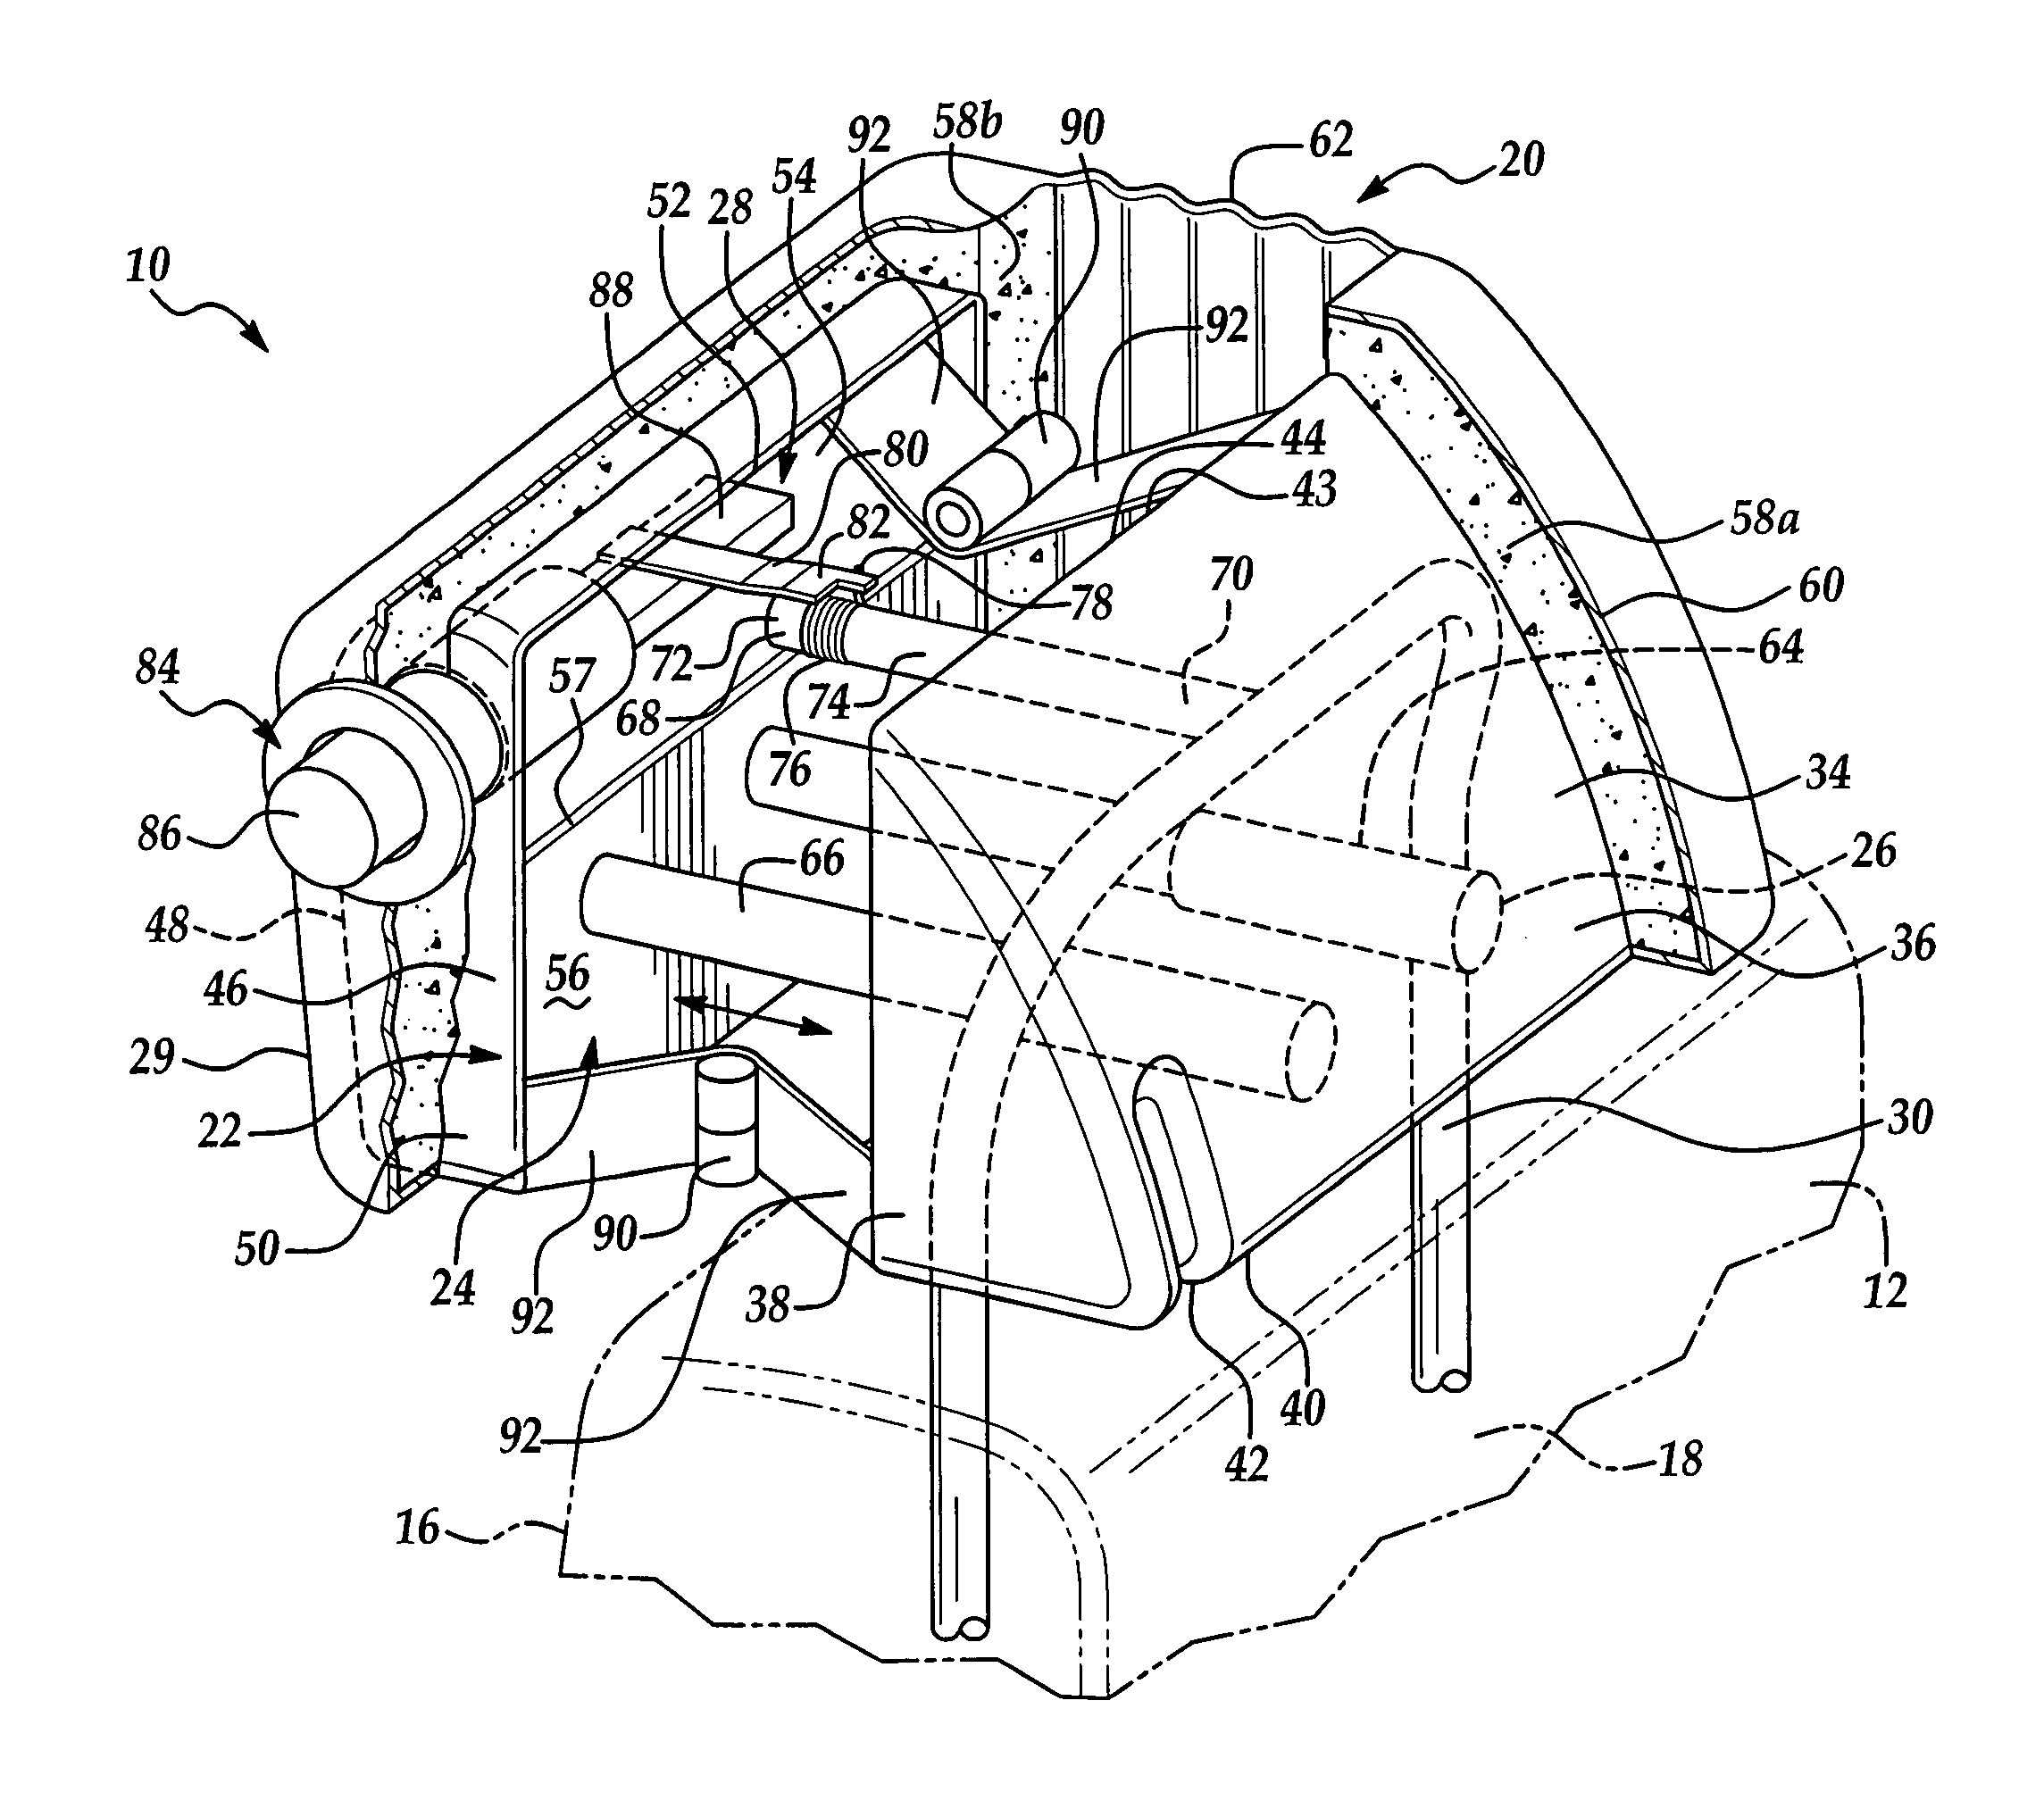 Infinitely adjustable head restraint assembly for a vehicle seat assembly